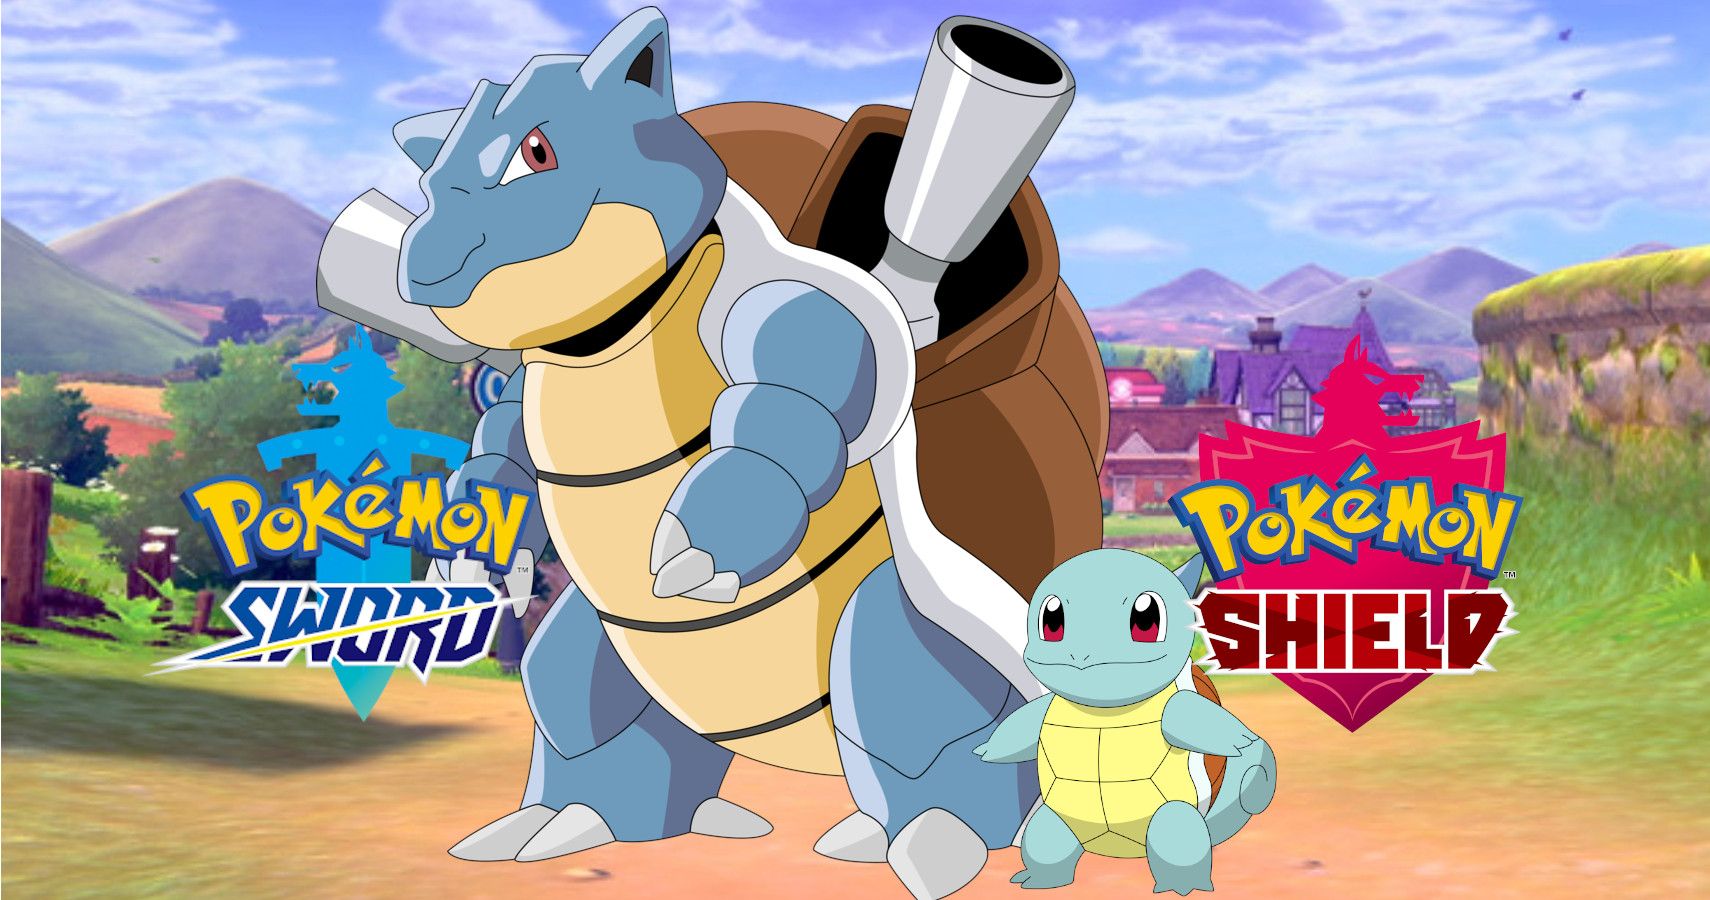 Pokémon Sword & Shield How To Find & Evolve Squirtle Into Blastoise